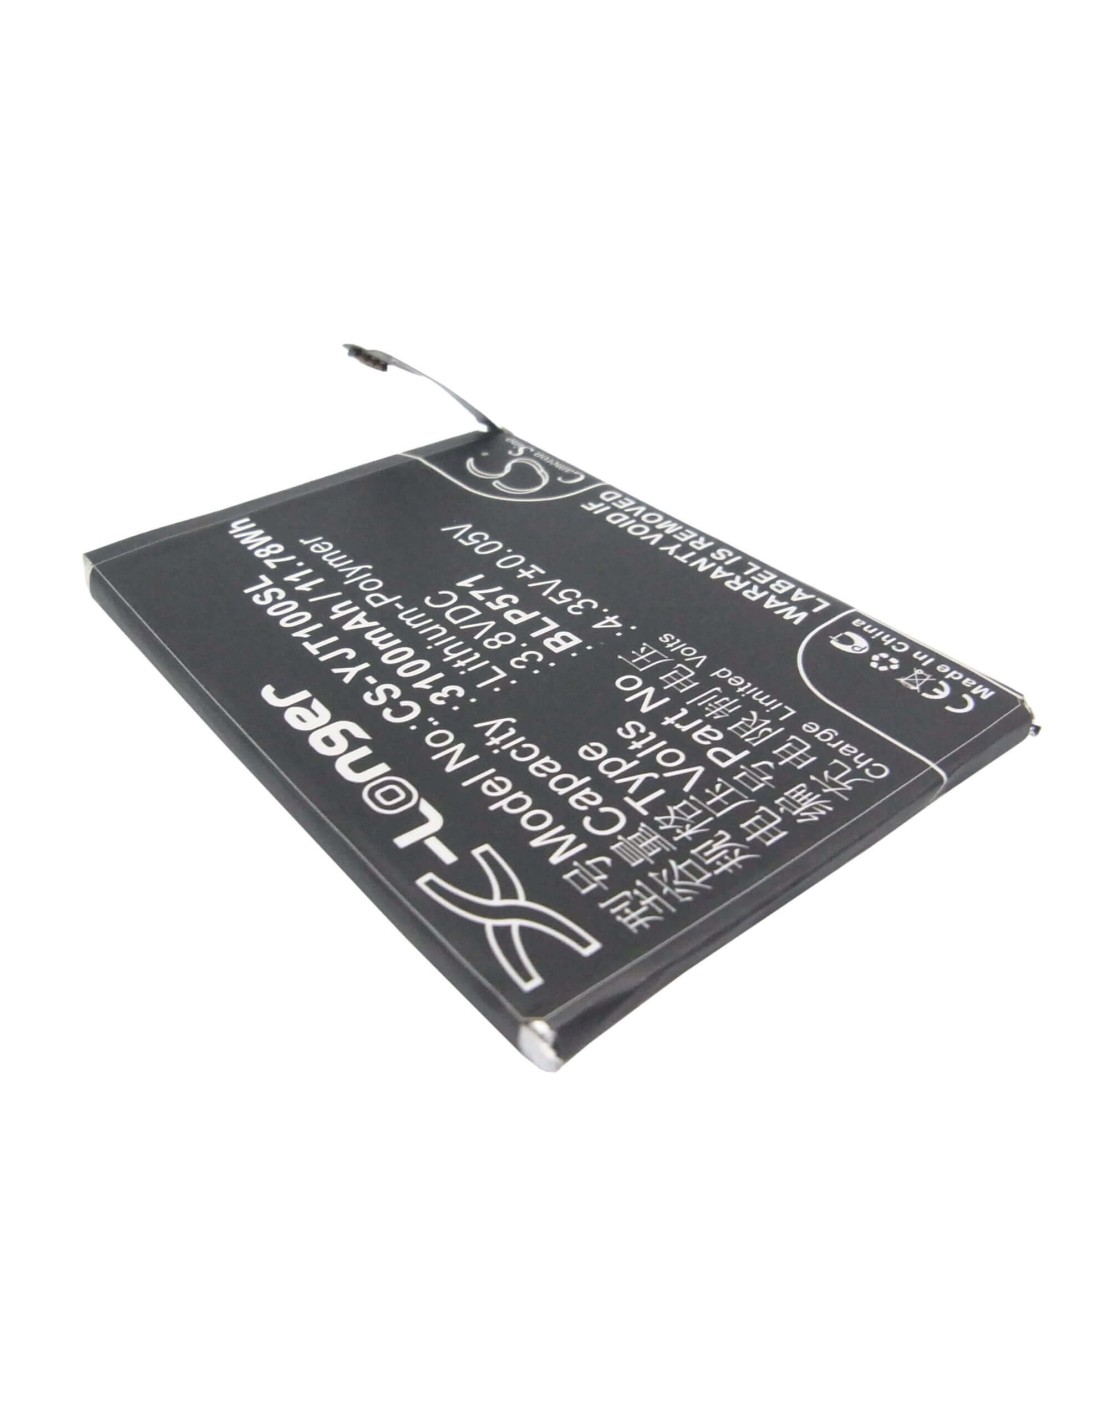 Battery for Oneplus One, A0001 3.8V, 3100mAh - 11.78Wh